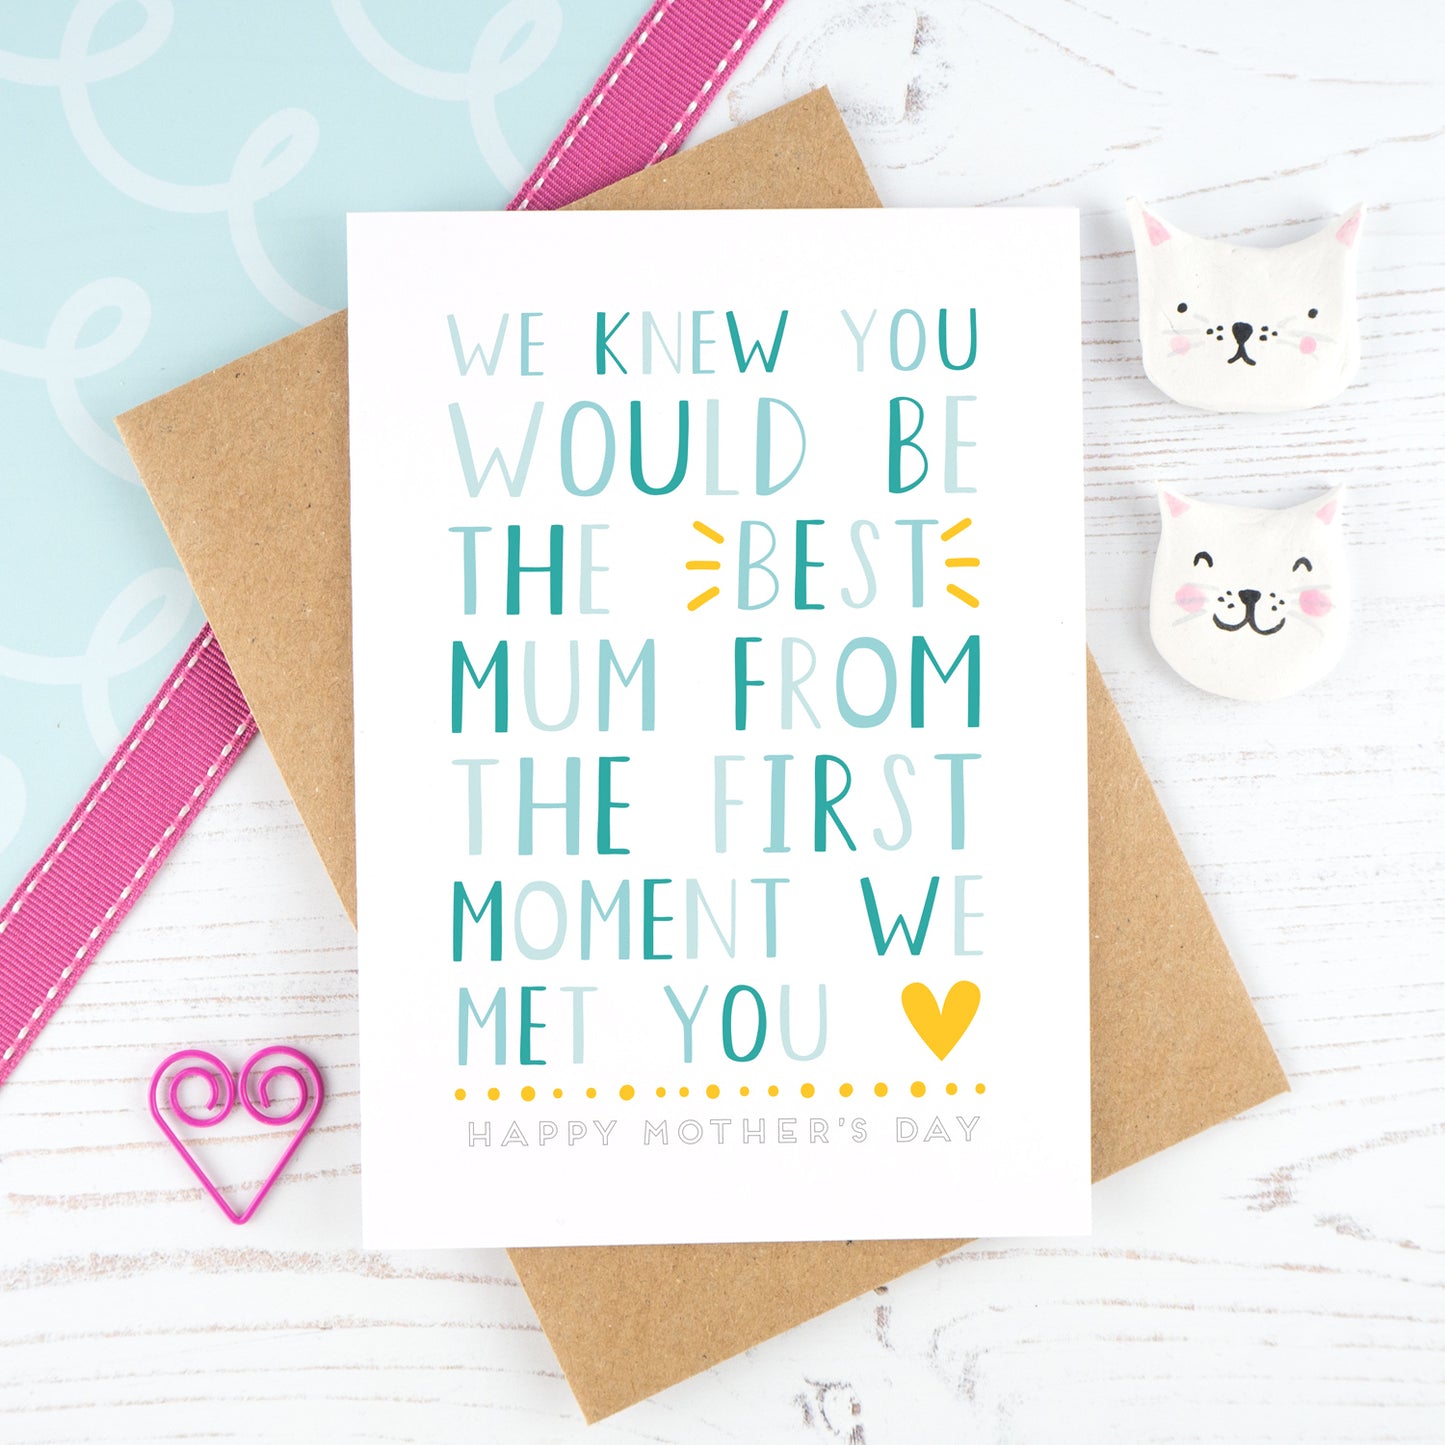 We knew you would be the best mum - blue mother's day card